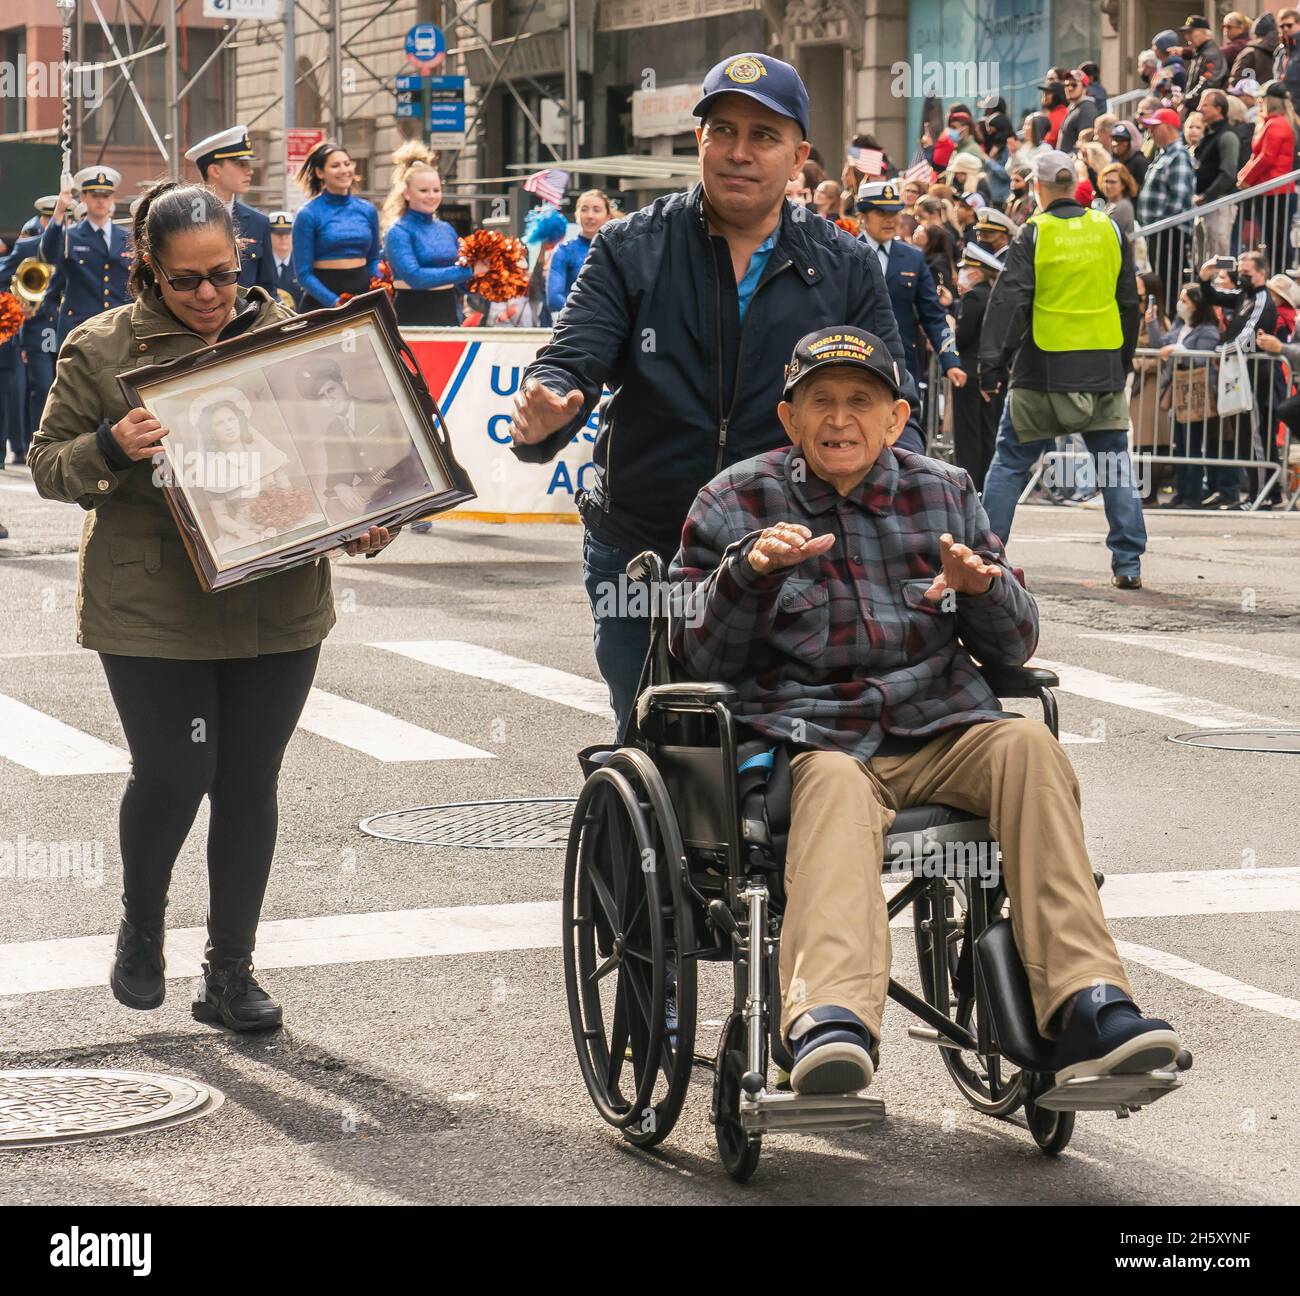 Manhattan, 5th Avenue, New York City  USA: November 11, 2021: Annual Veteran's Day Parade ; American veterans of foreign wars; American heroes Stock Photo